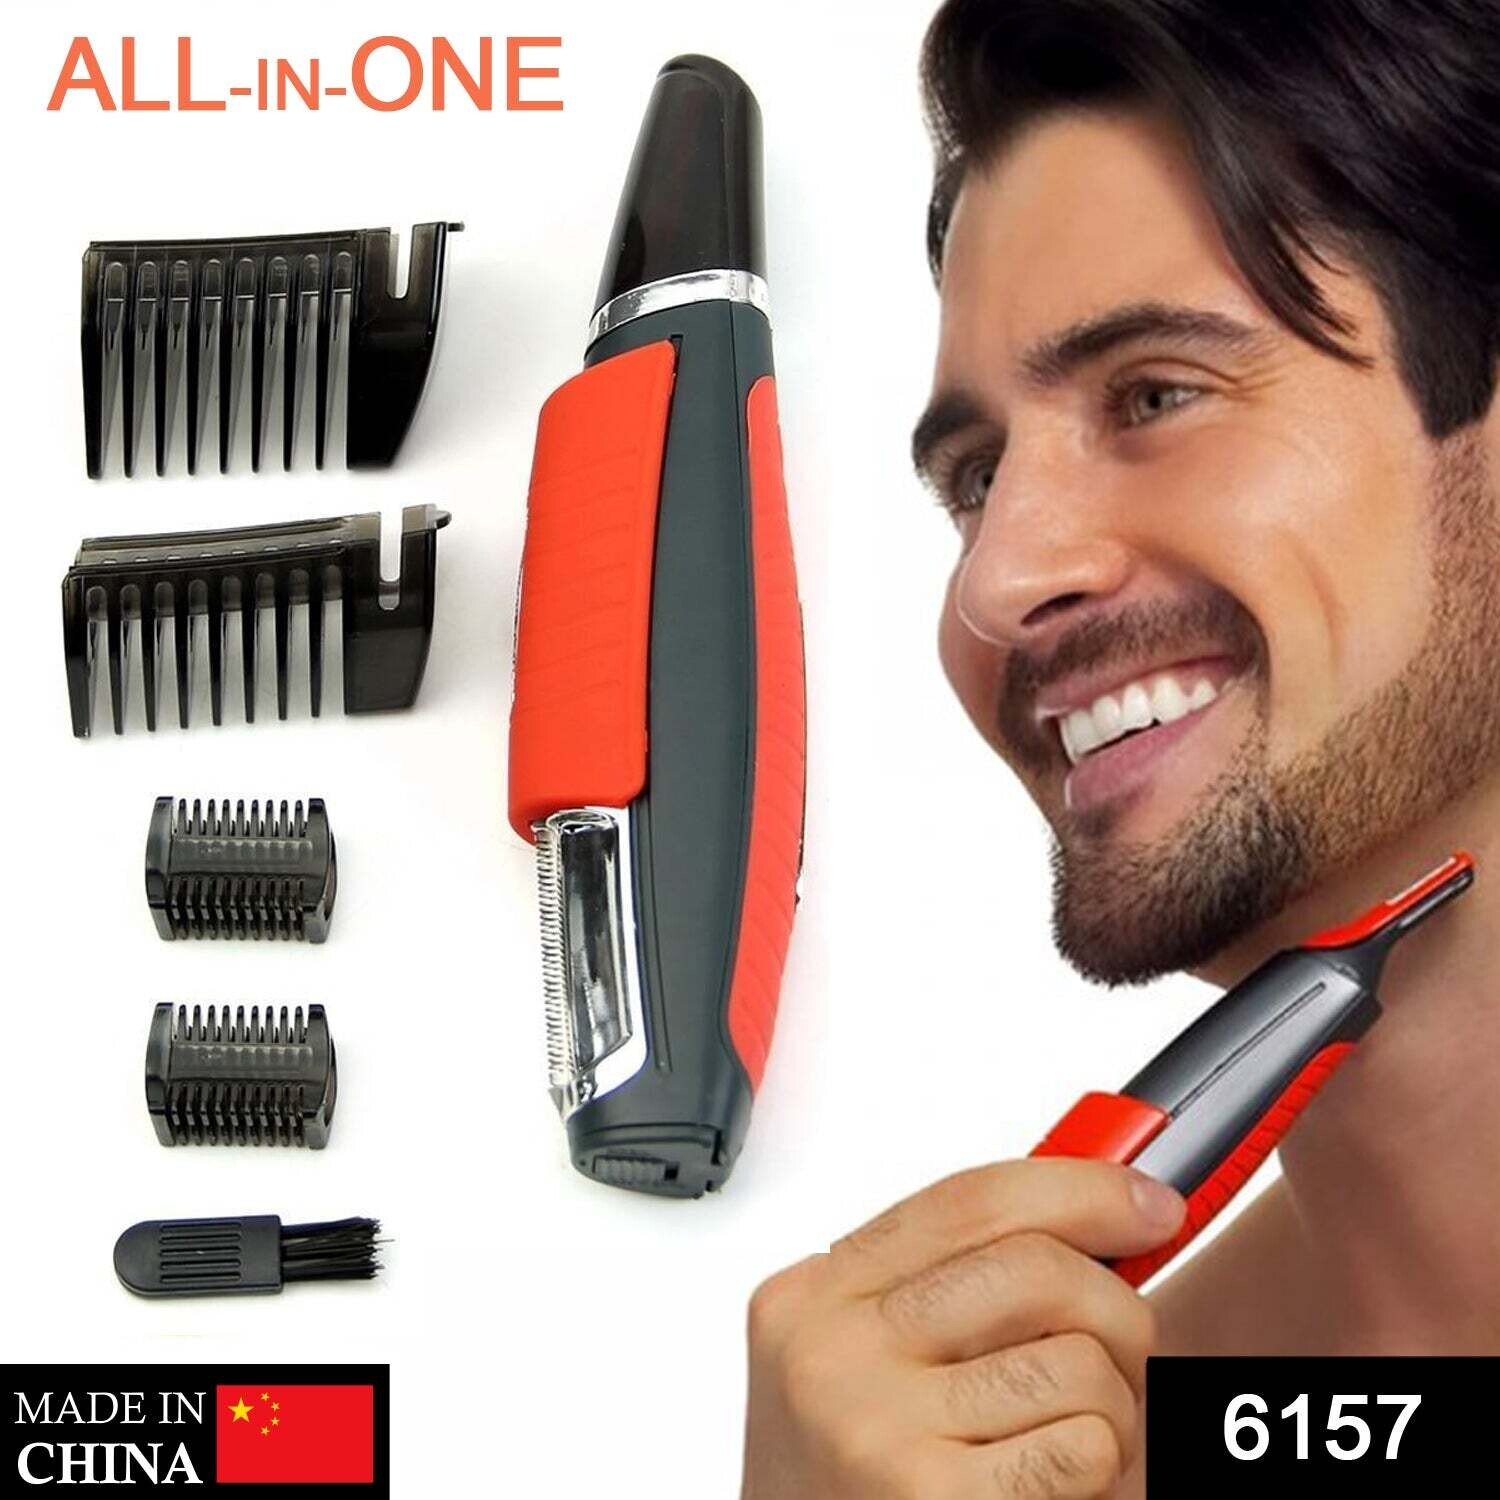 6157 All In 1 Pre Trimmer Used For Shaping And Trimming Of Beard Purposes.